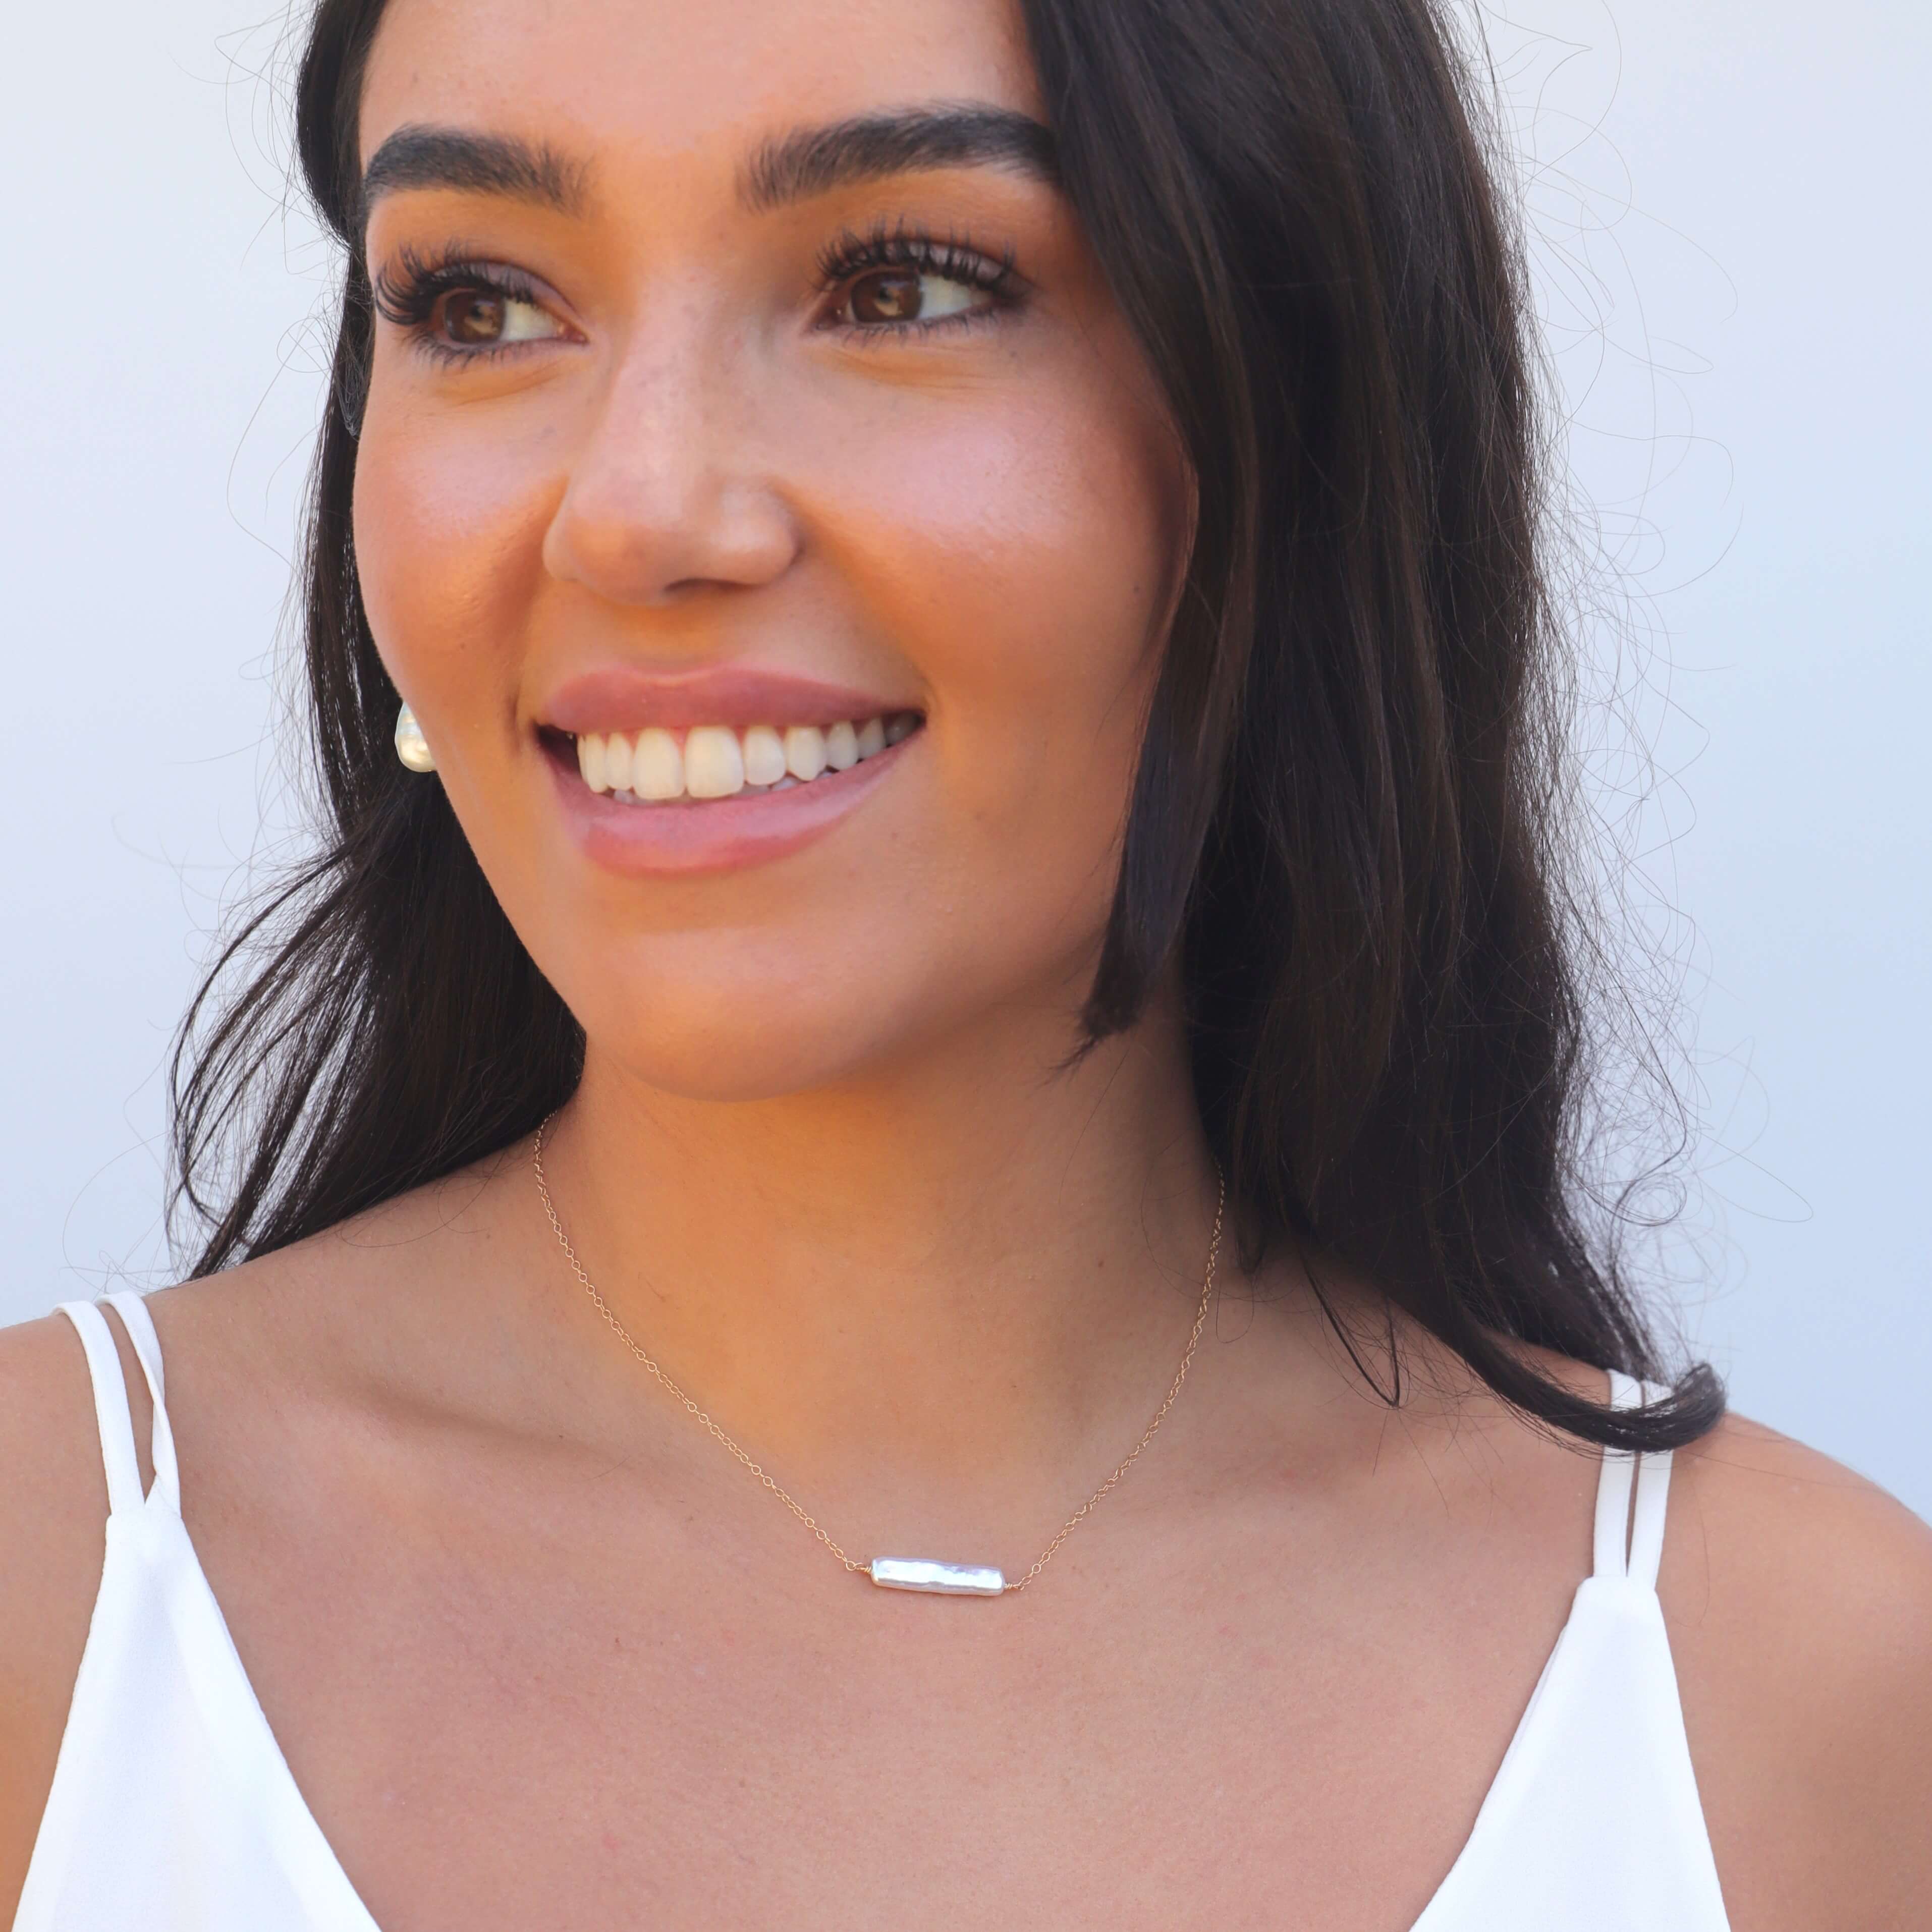 Smiling model wearing white top and pearl bar necklace